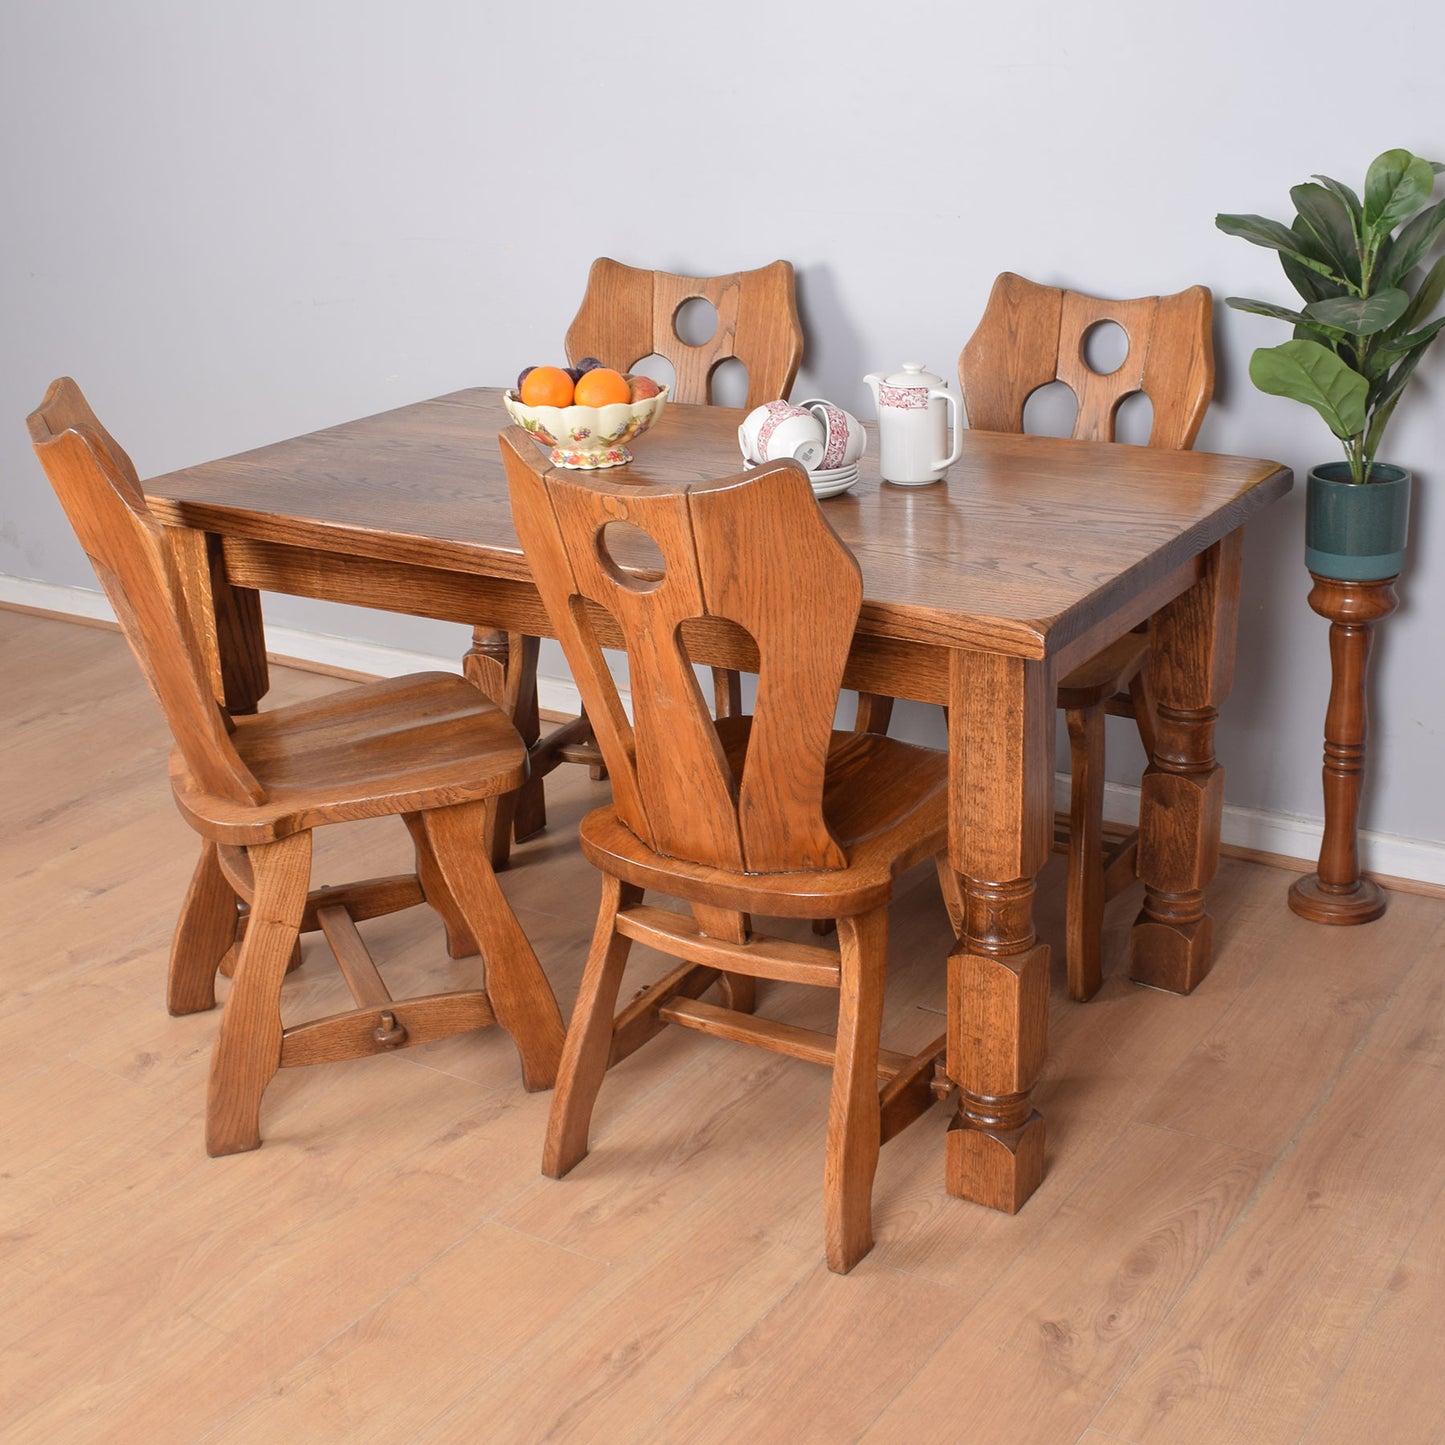 Dutch Oak Dining Table with Four Chairs